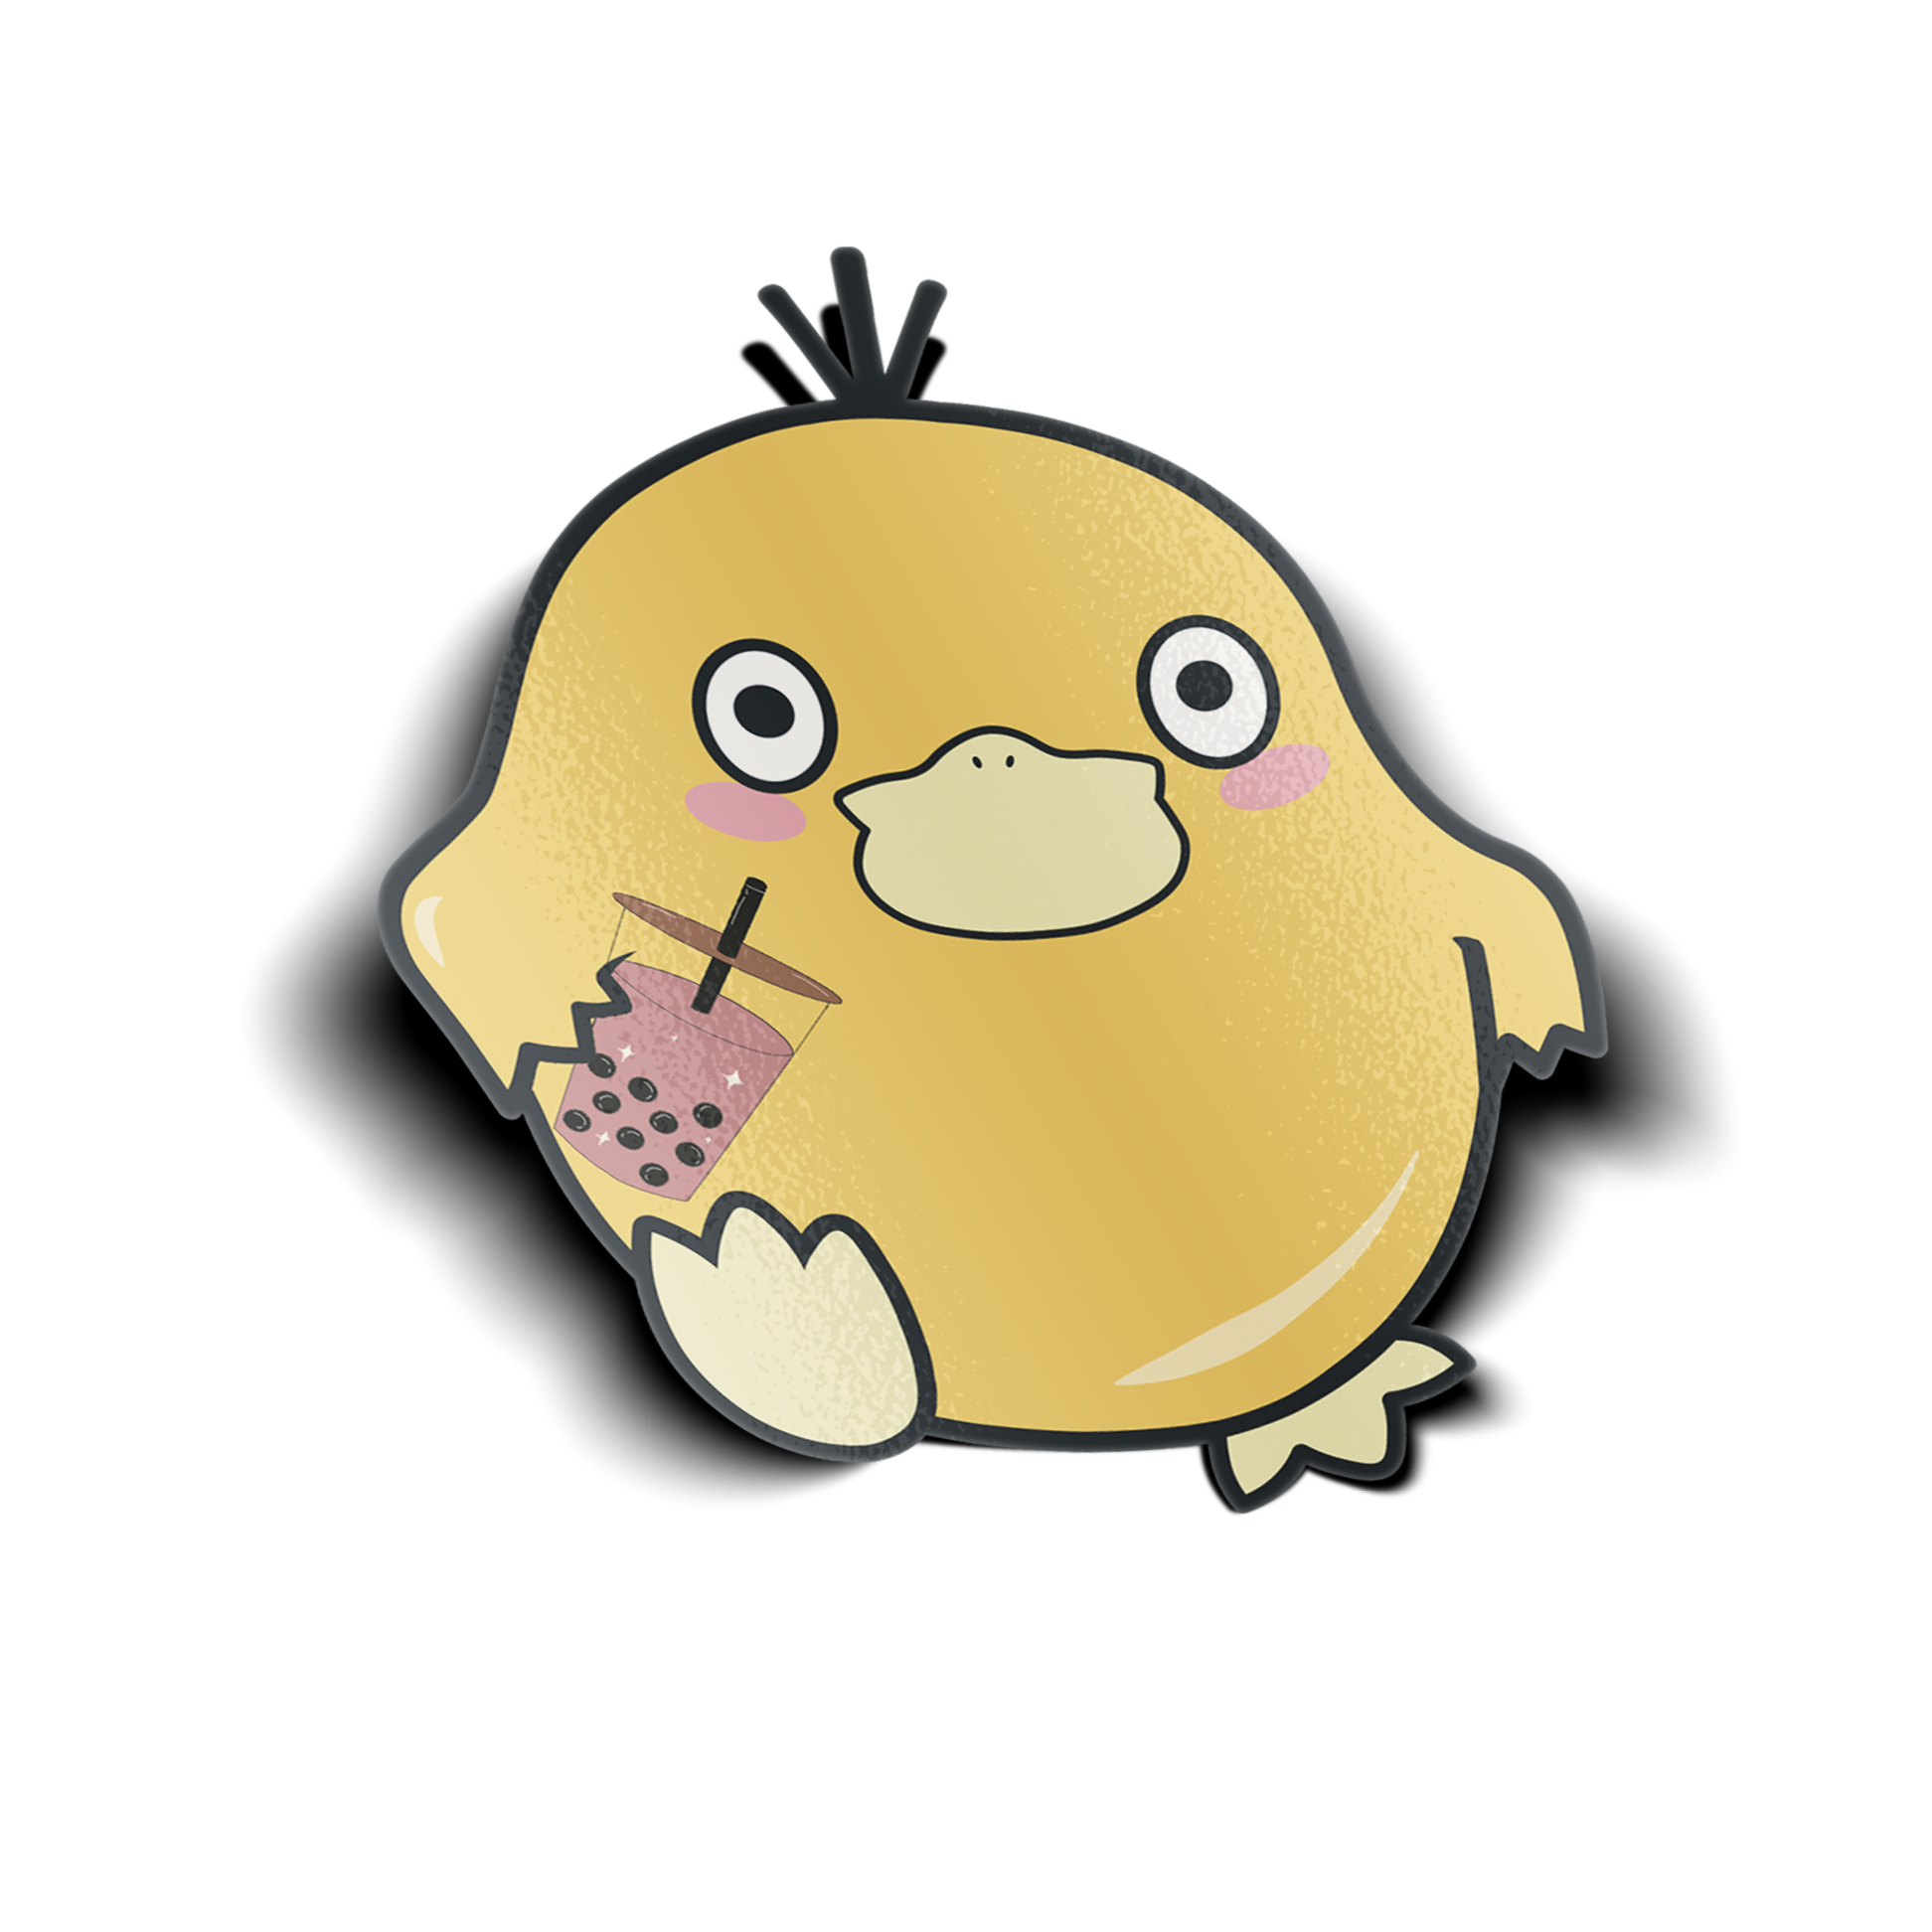 Psyduck with Boba Sticker design includes Pokemon Psyduck holding a pink boba cup.